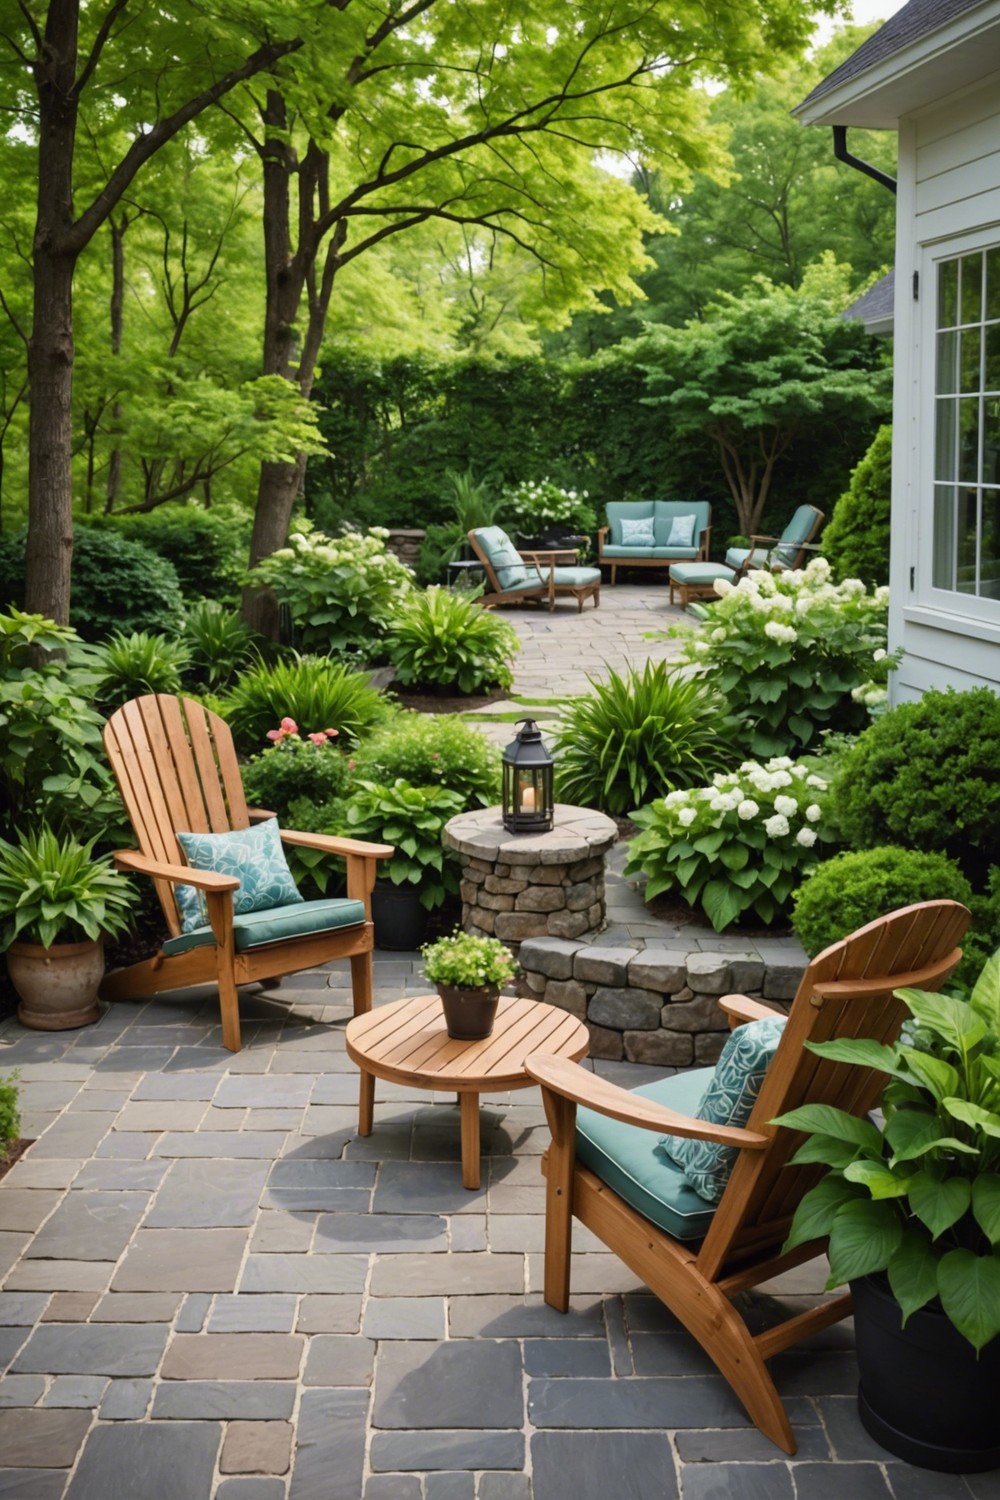 Adirondack Chairs for a Classic Look